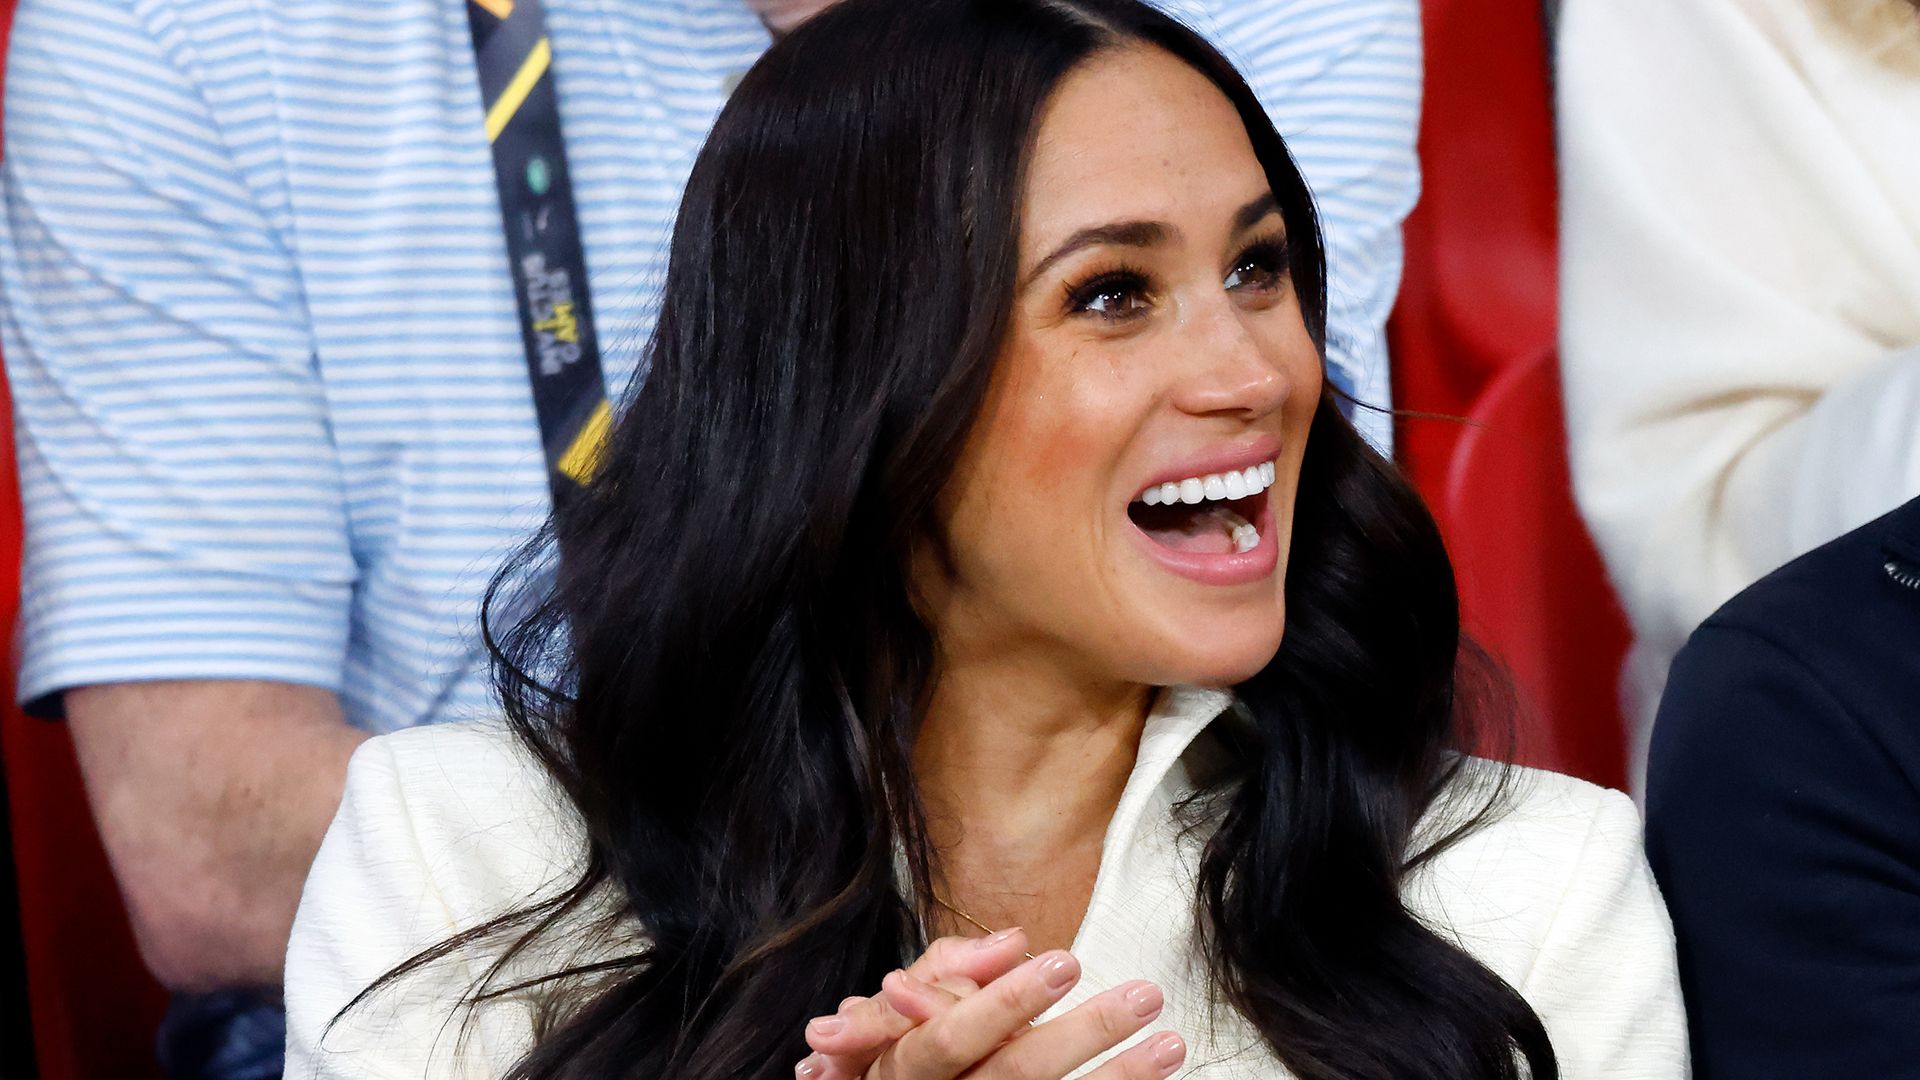 Meghan Markle laughing at Invictus Games